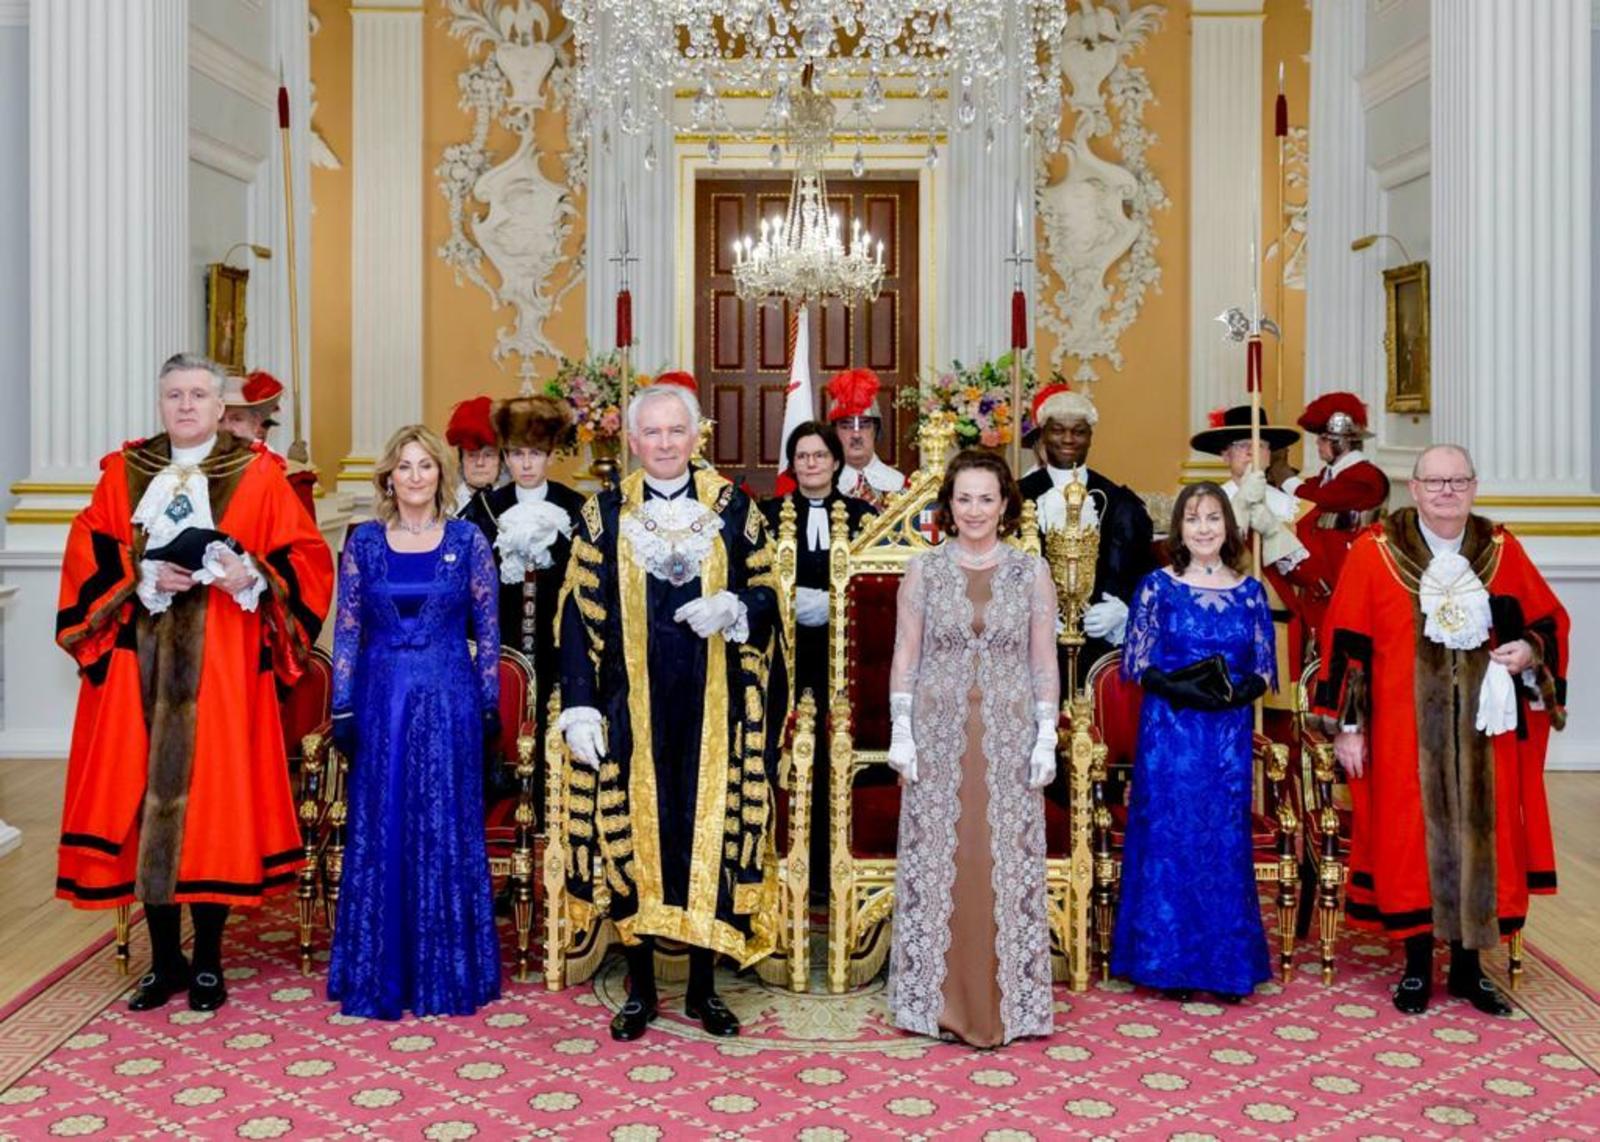 23  Mar 23 - The traditional State Dinner to thank the Livery Masters, Prime Wardens and Upper Bailiff for their Companies ongoing and extraordinary contribution to their professions, to numerous charities, education and to the civic life of The City was held with full pomp at the beautiful Mansion House.